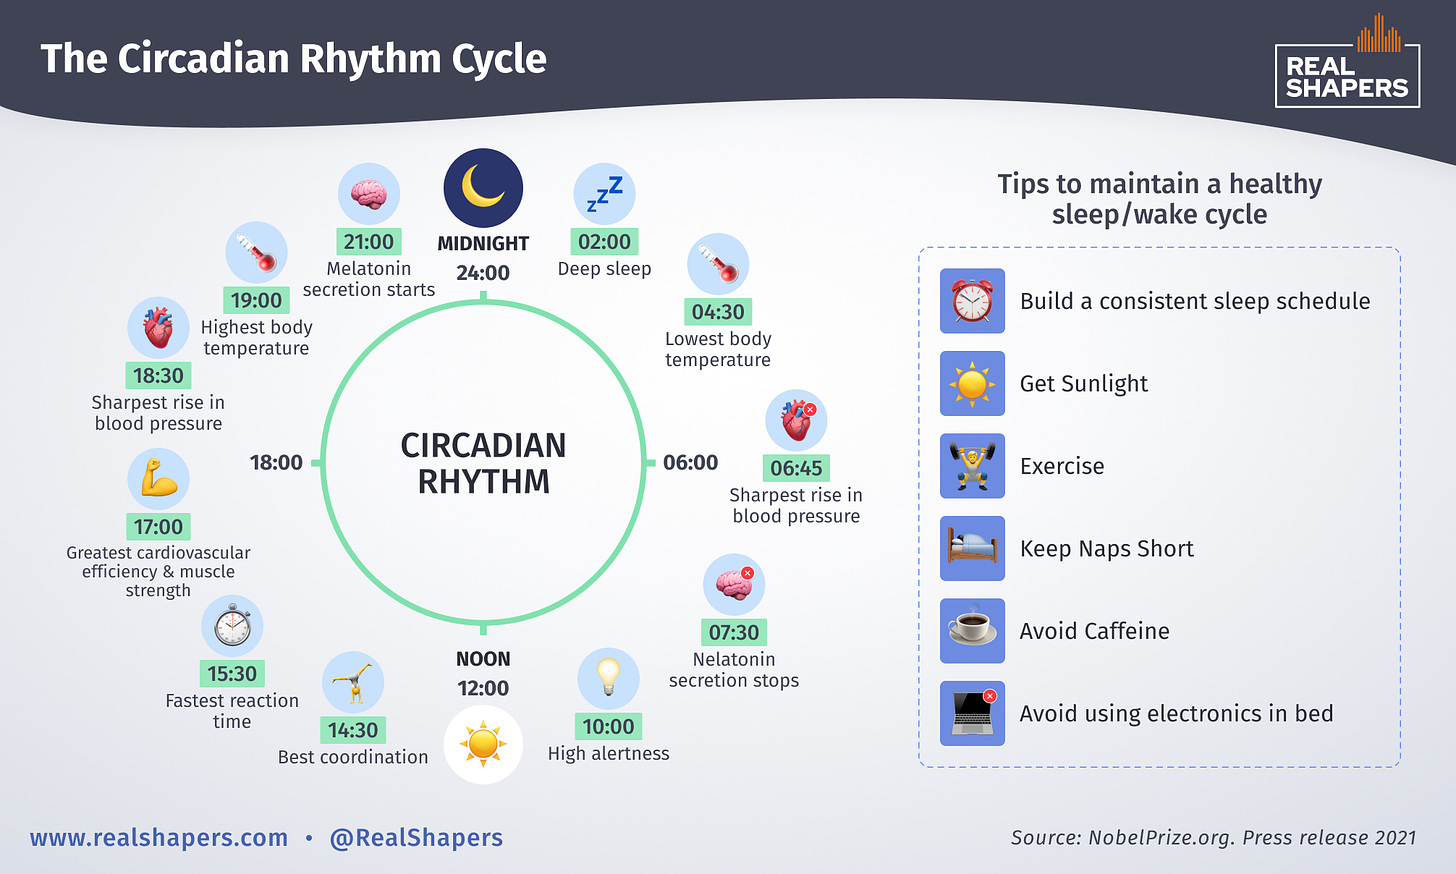 The Circadian Rhythm and Tips to maintain a healthy sleep/wake cycle - Real Shapers